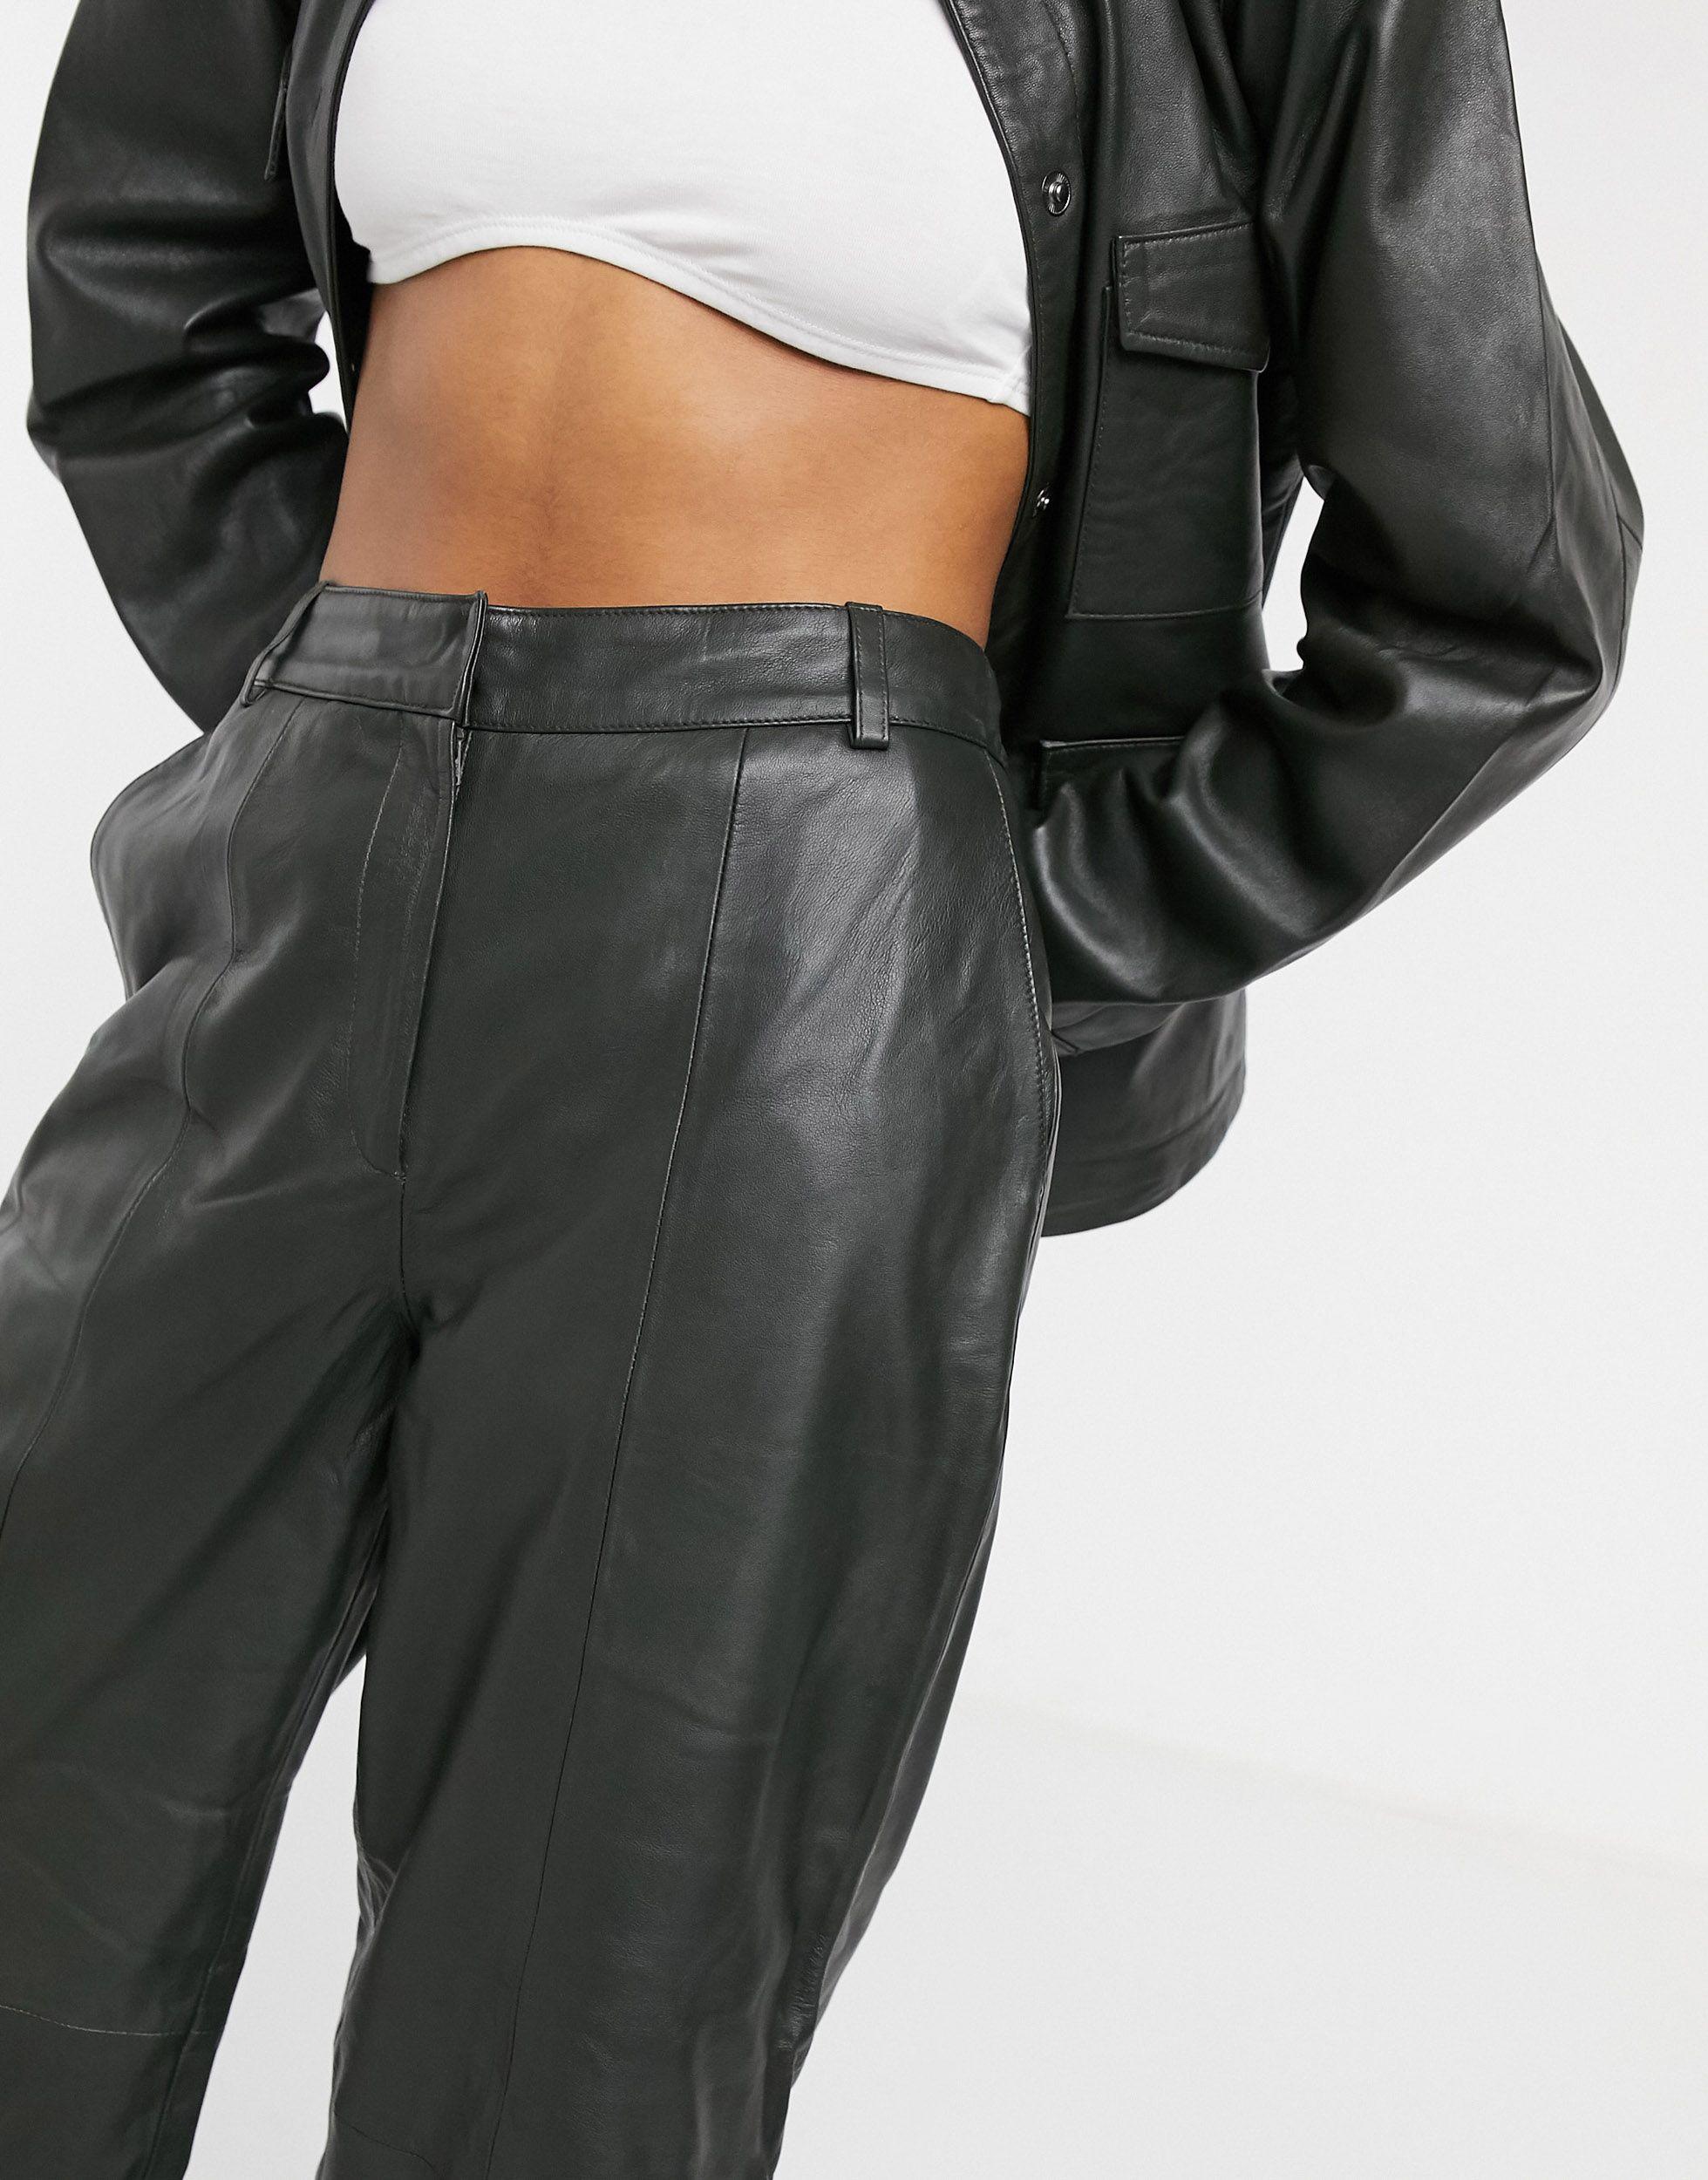 selected femme leather trousers,Quality assurance,protein-burger.com